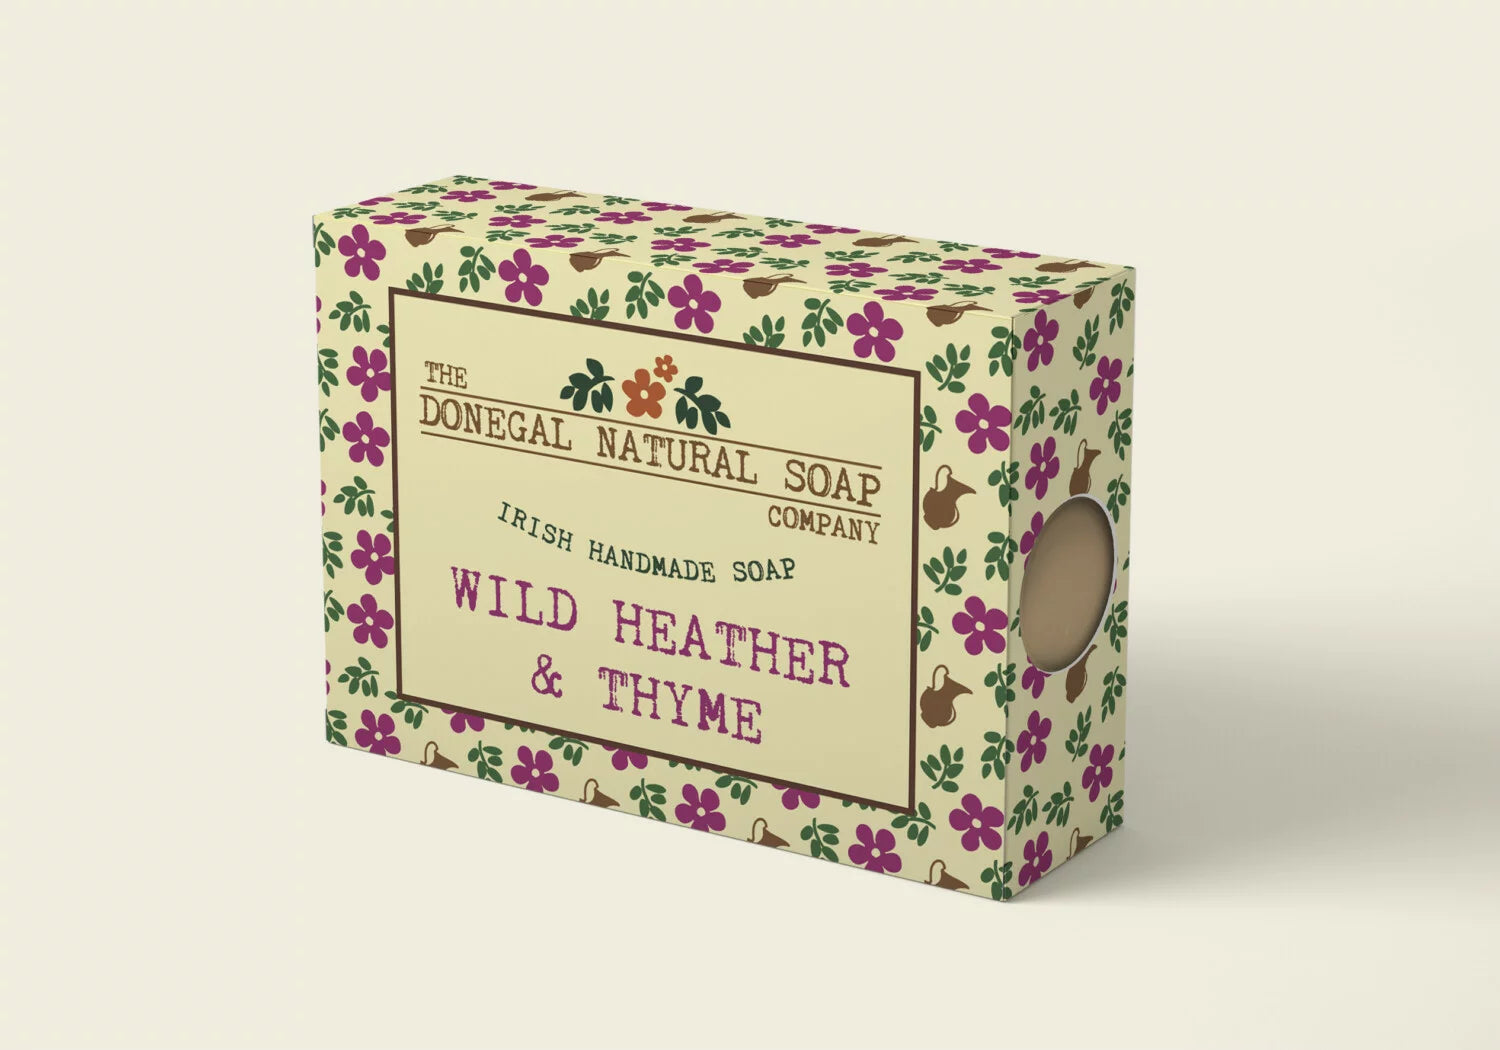 Wild Heather & Thyme Soap by The Donegal Natural Soap Company